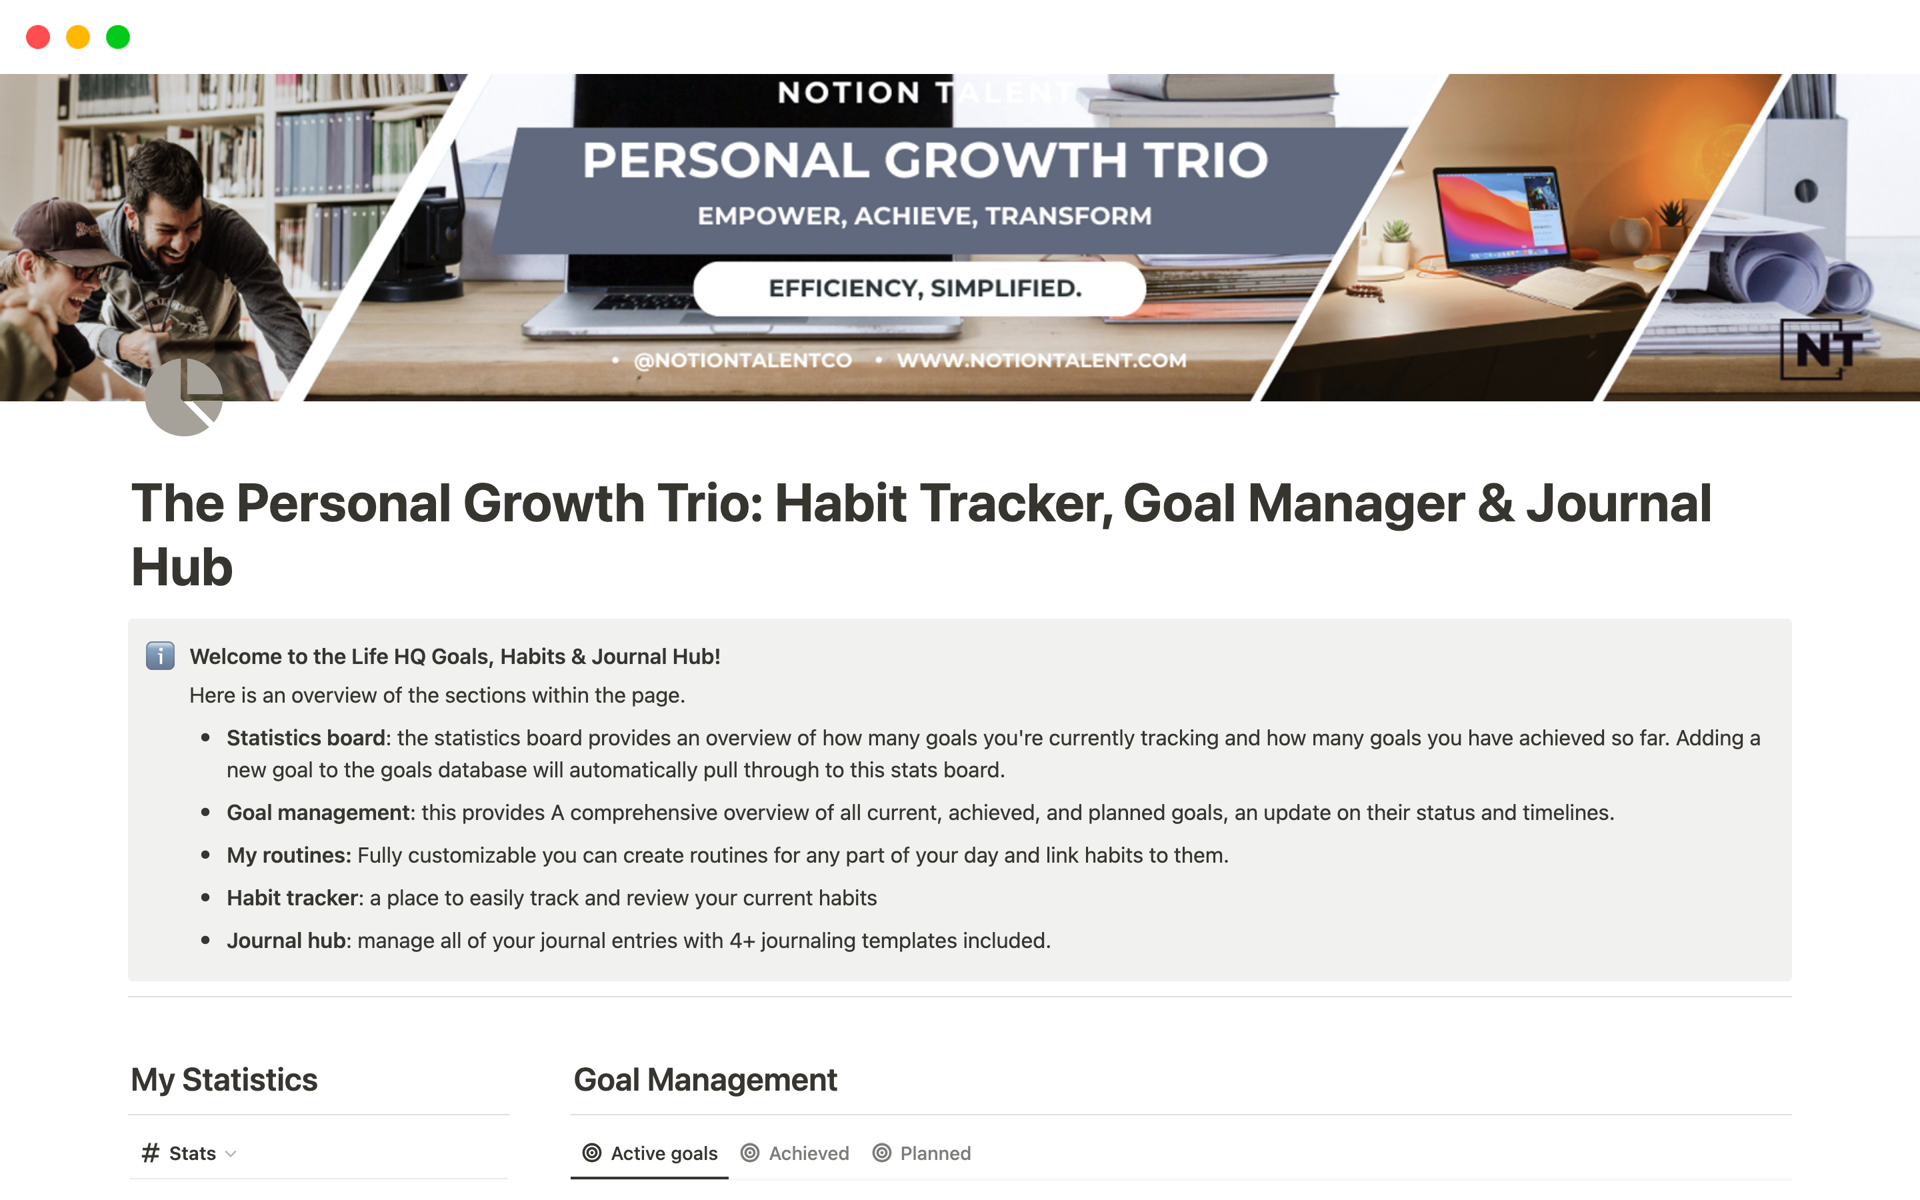 Elevate your personal development journey with The Personal Growth Trio: Notion Template, encompassing a Habit Tracker, Goal Manager, and Journal Hub to track, plan, and reflect on your growth.